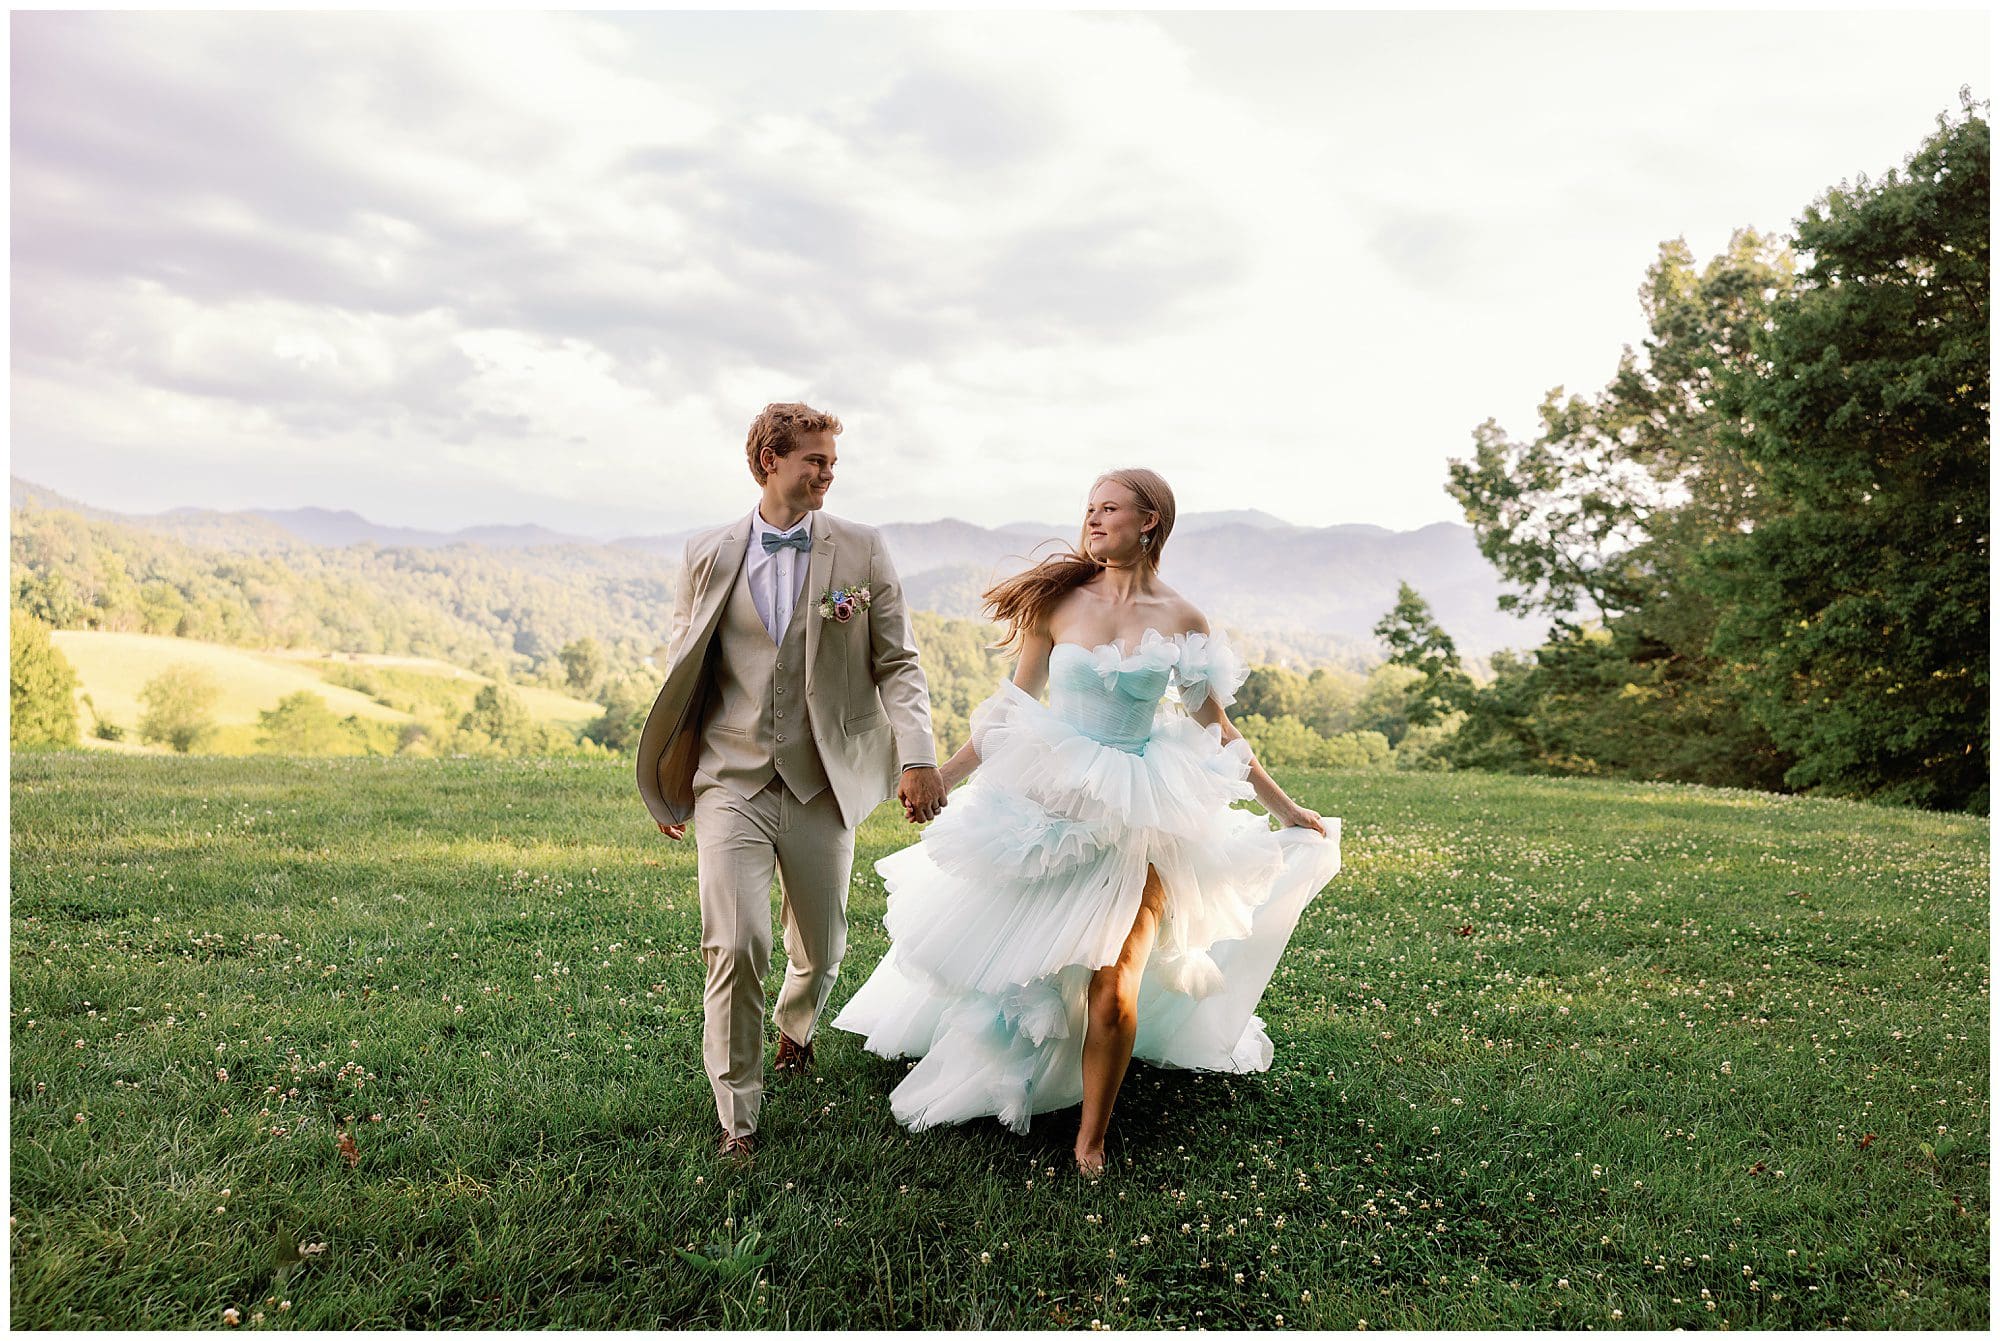 A Parisian-inspired summer wedding at The Ridge, with the bride and groom walking through a grassy field.